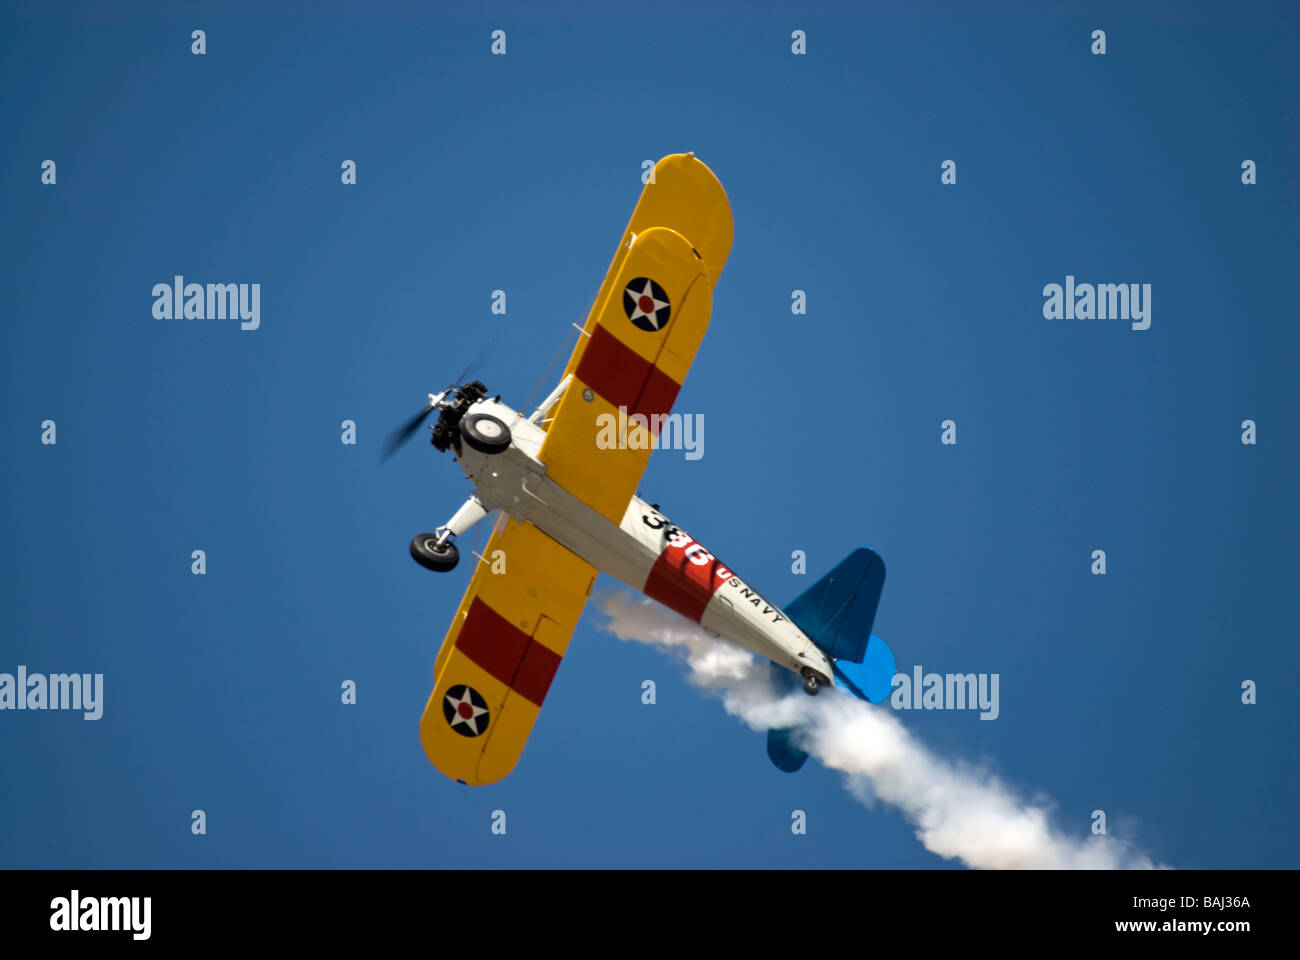 A US Navy version of the Stearman biplane trainer - in flight and seen from a sharp angle from below. Stock Photo